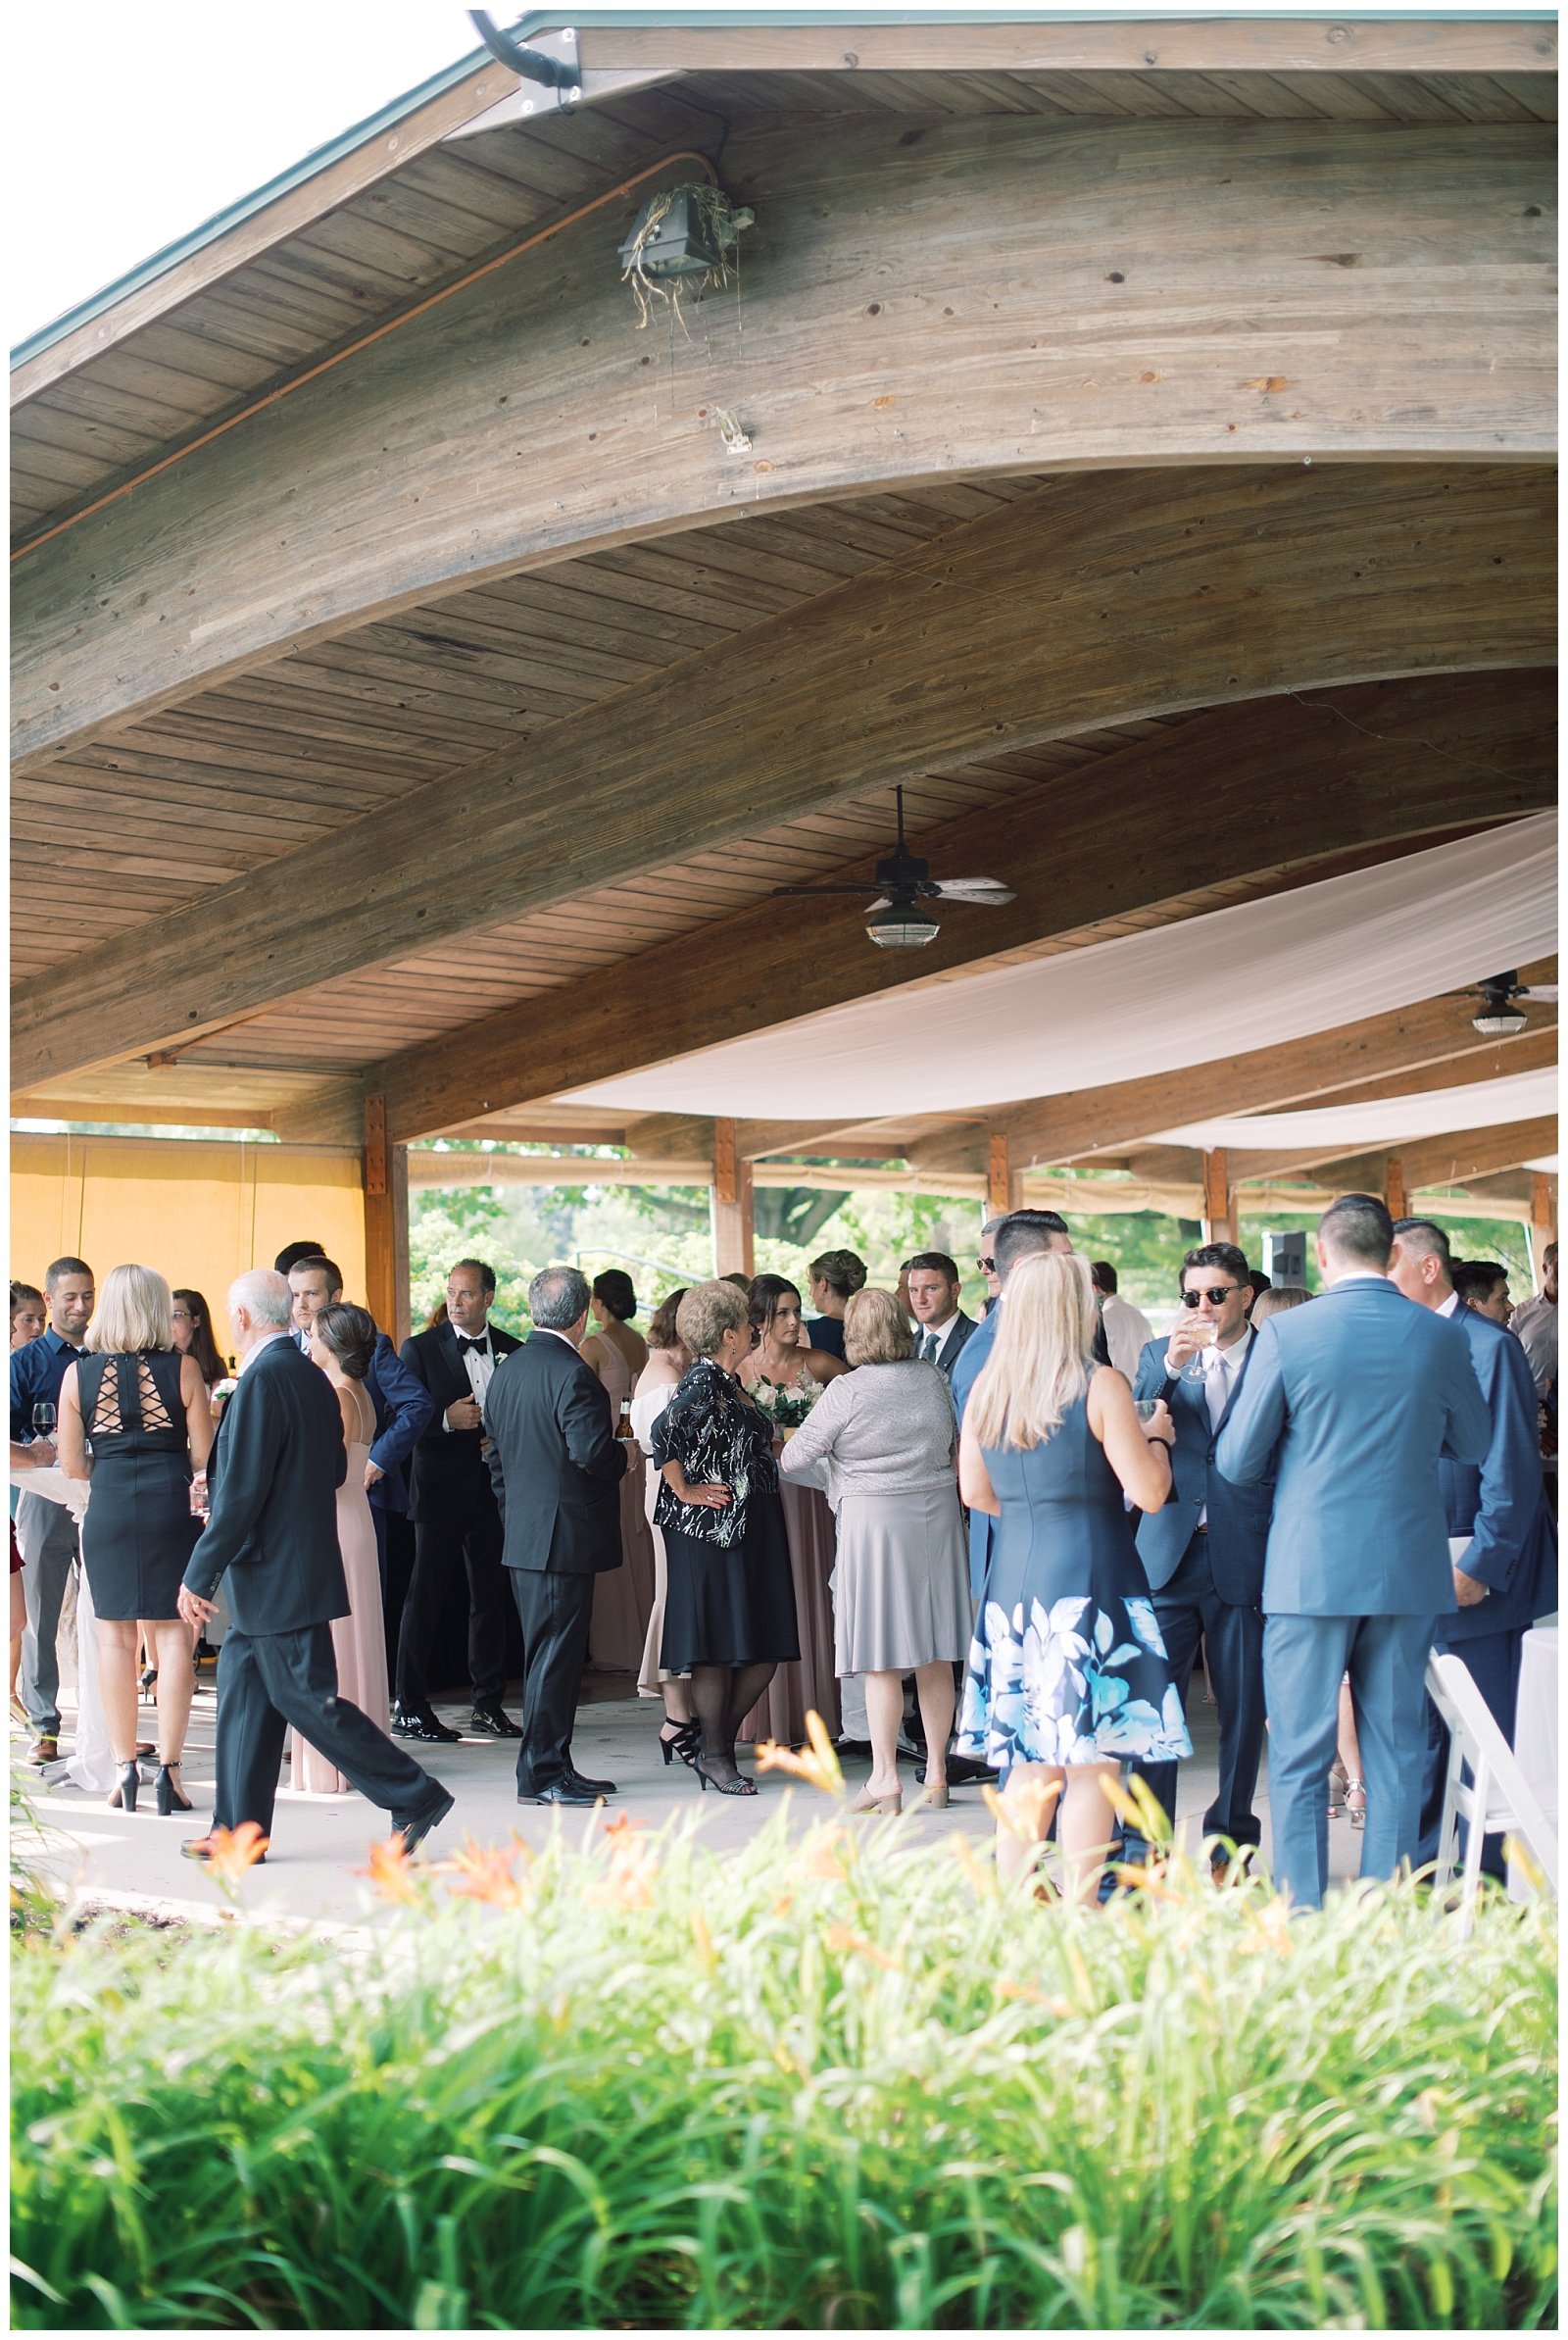 Cocktail hour under a covered Pavillion at Grand Geneva wedding